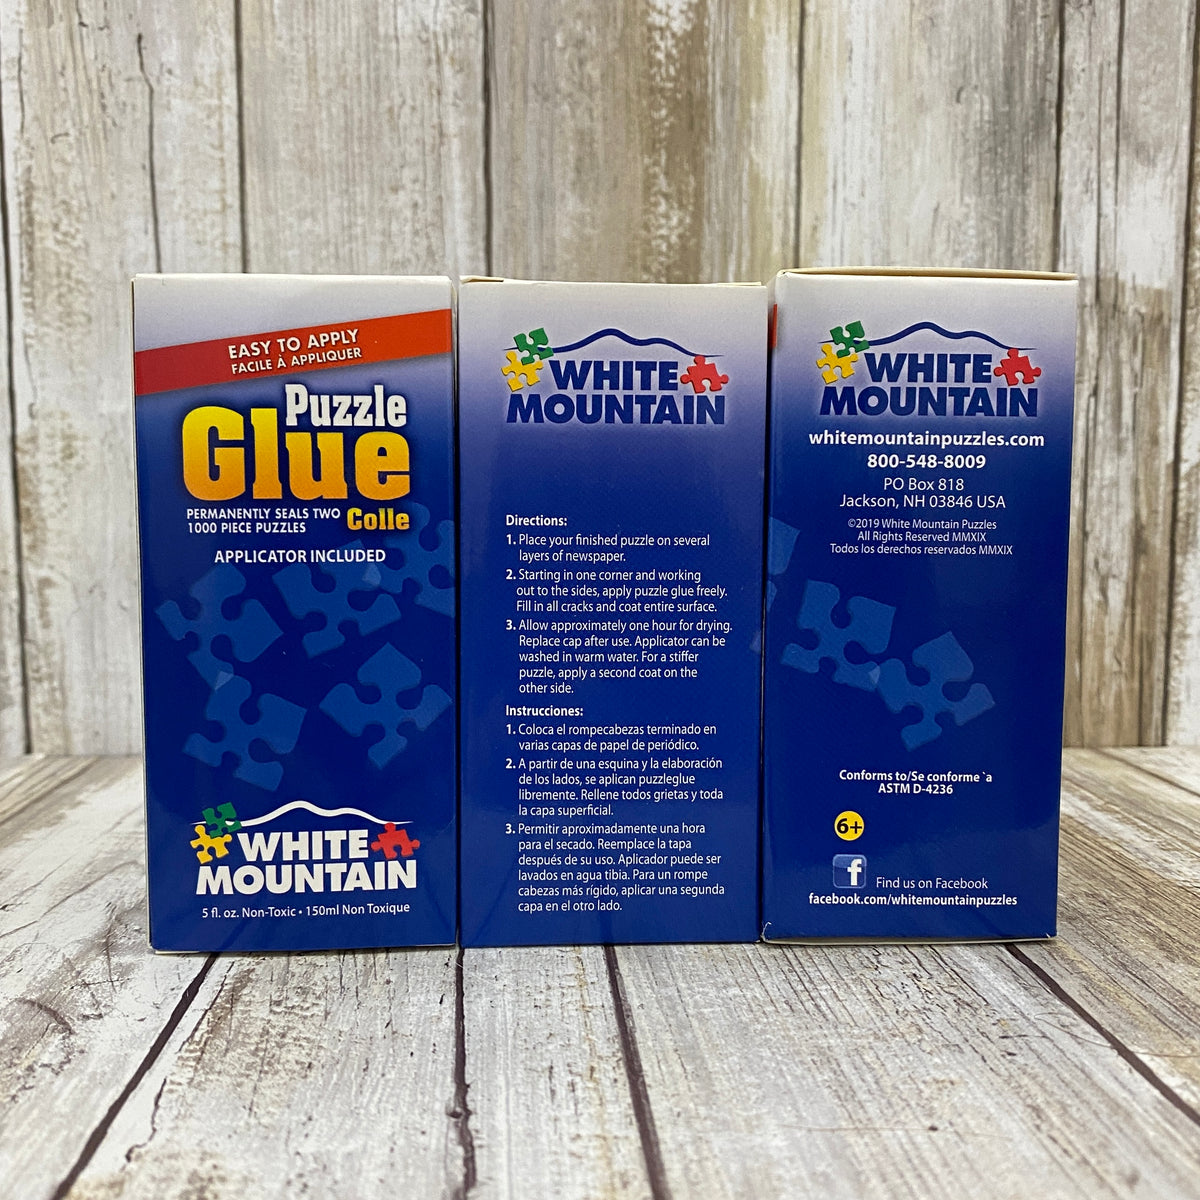 Puzzle Glue for 1000 Puzzles by White Mountain Puzzles – Houser